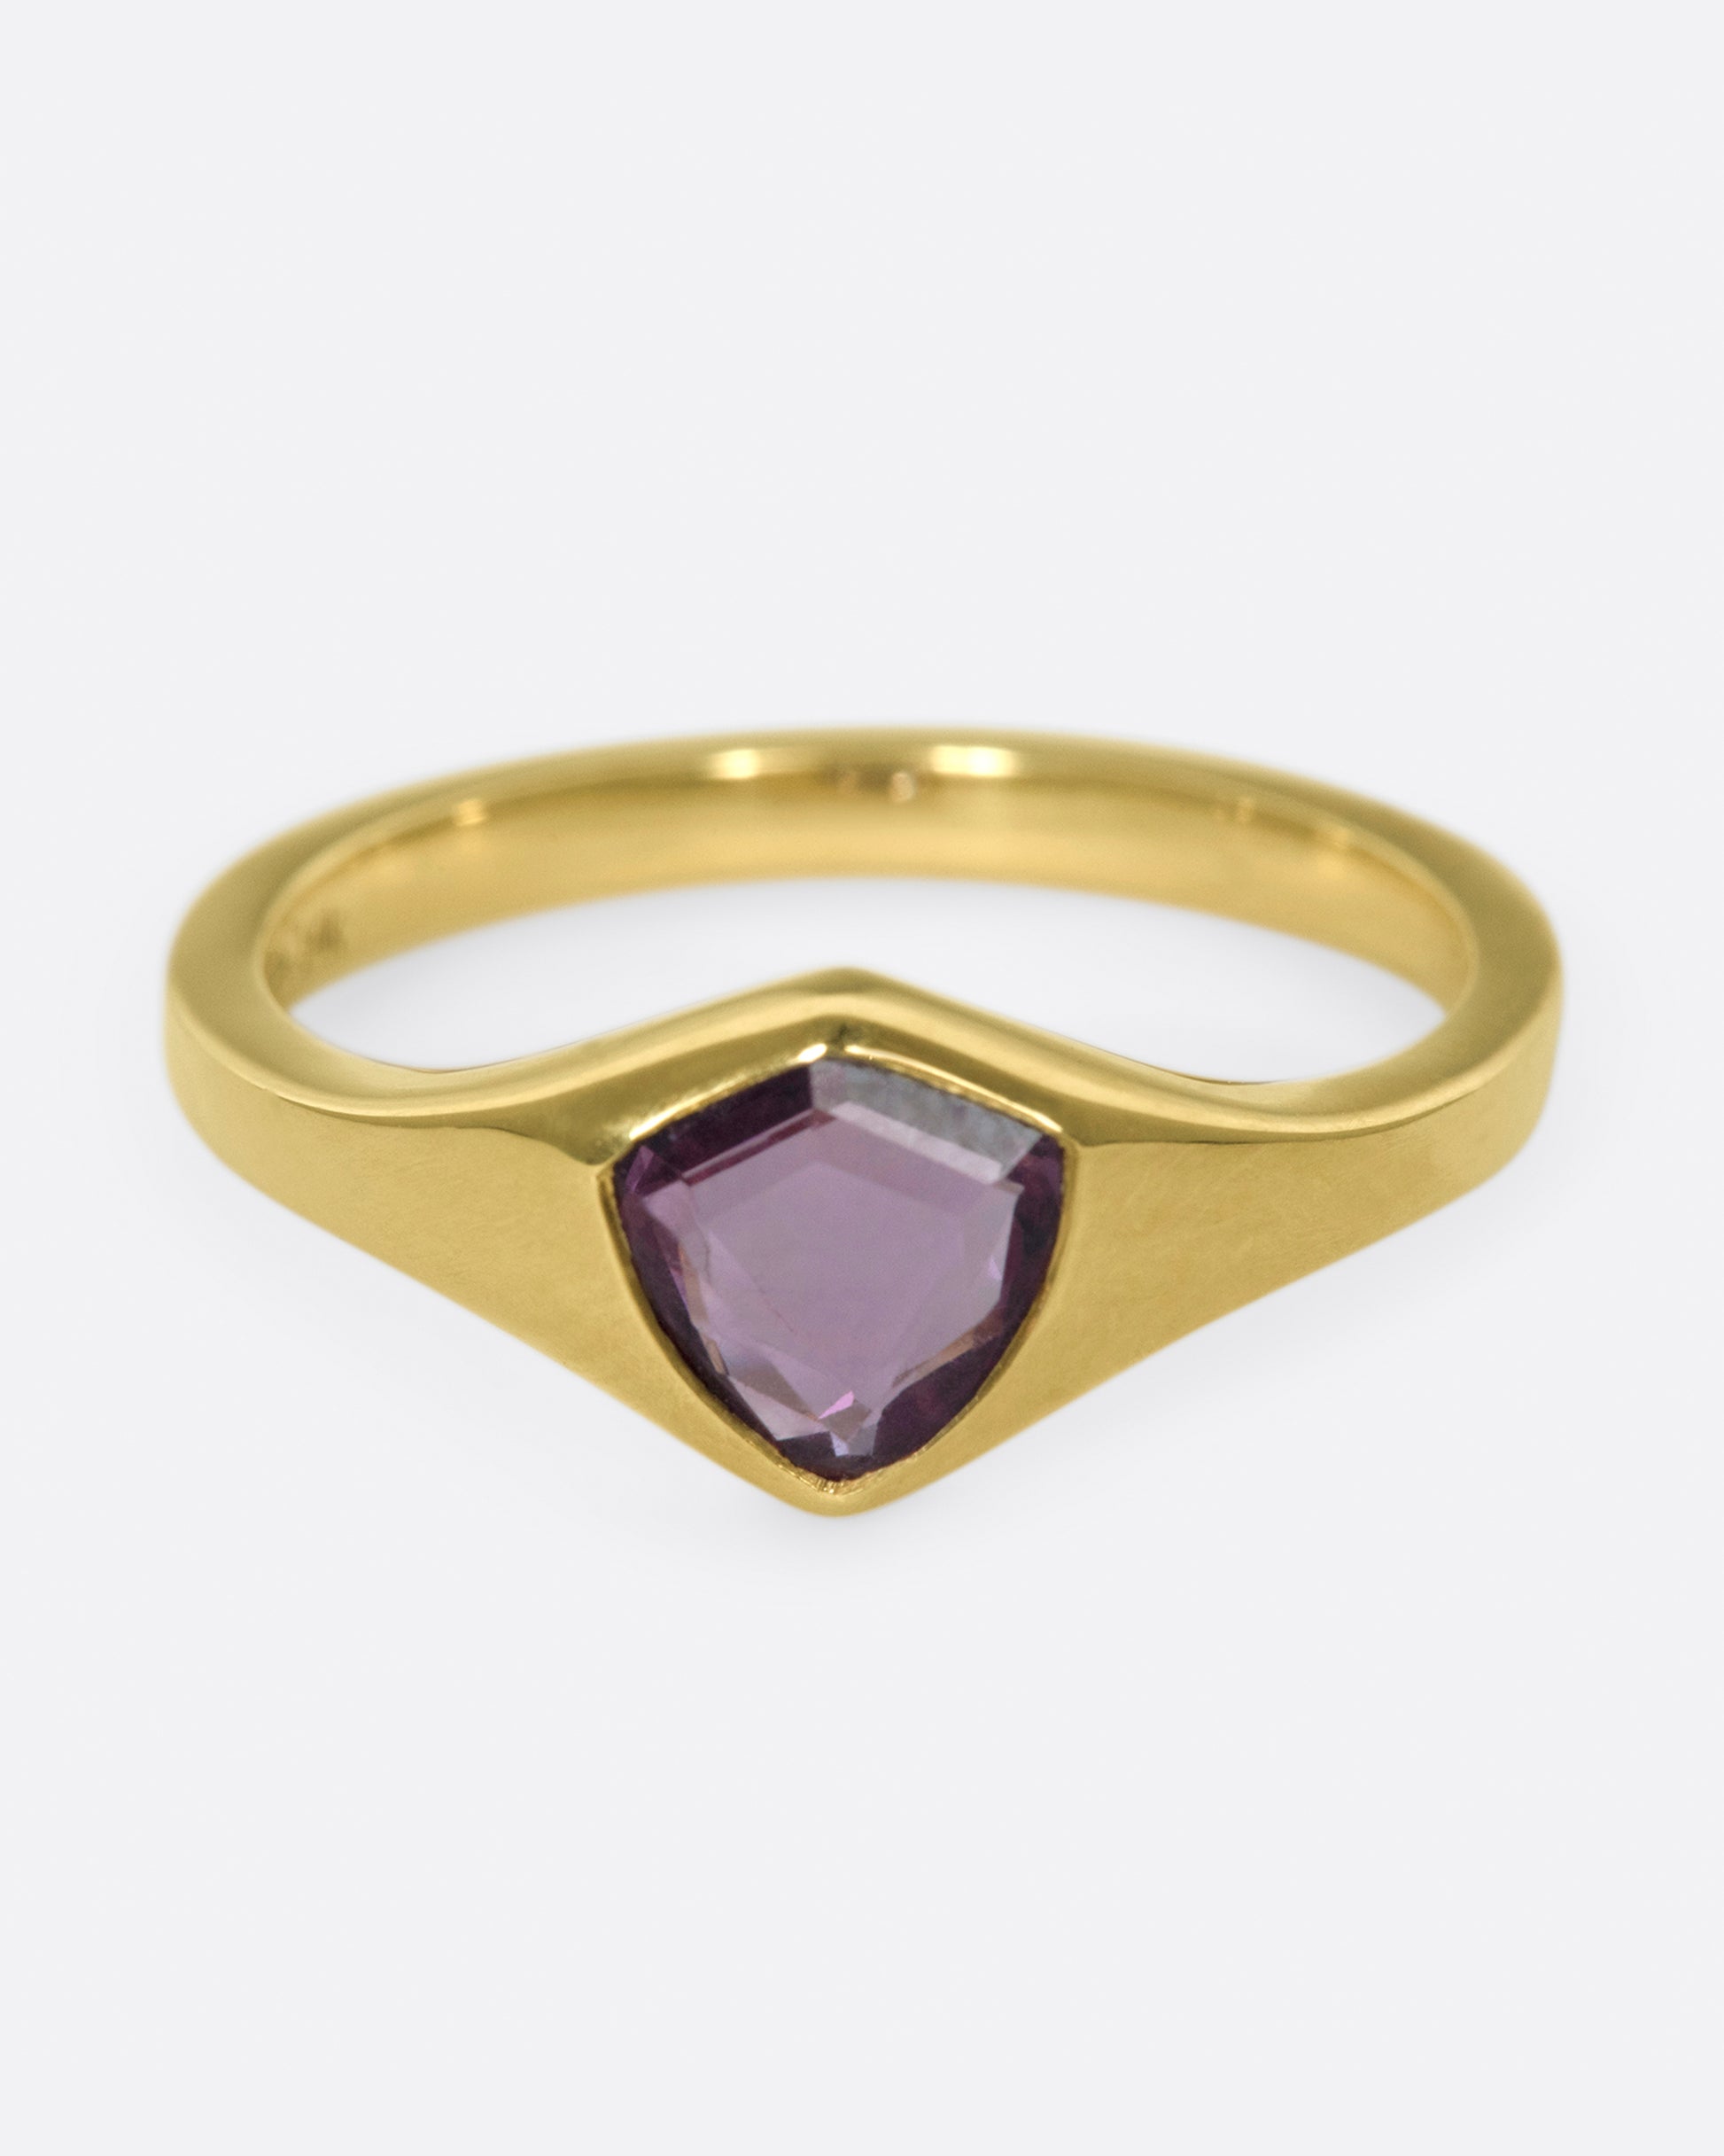 A classic, polished gold signet ring with a burgundy sapphire at its center.